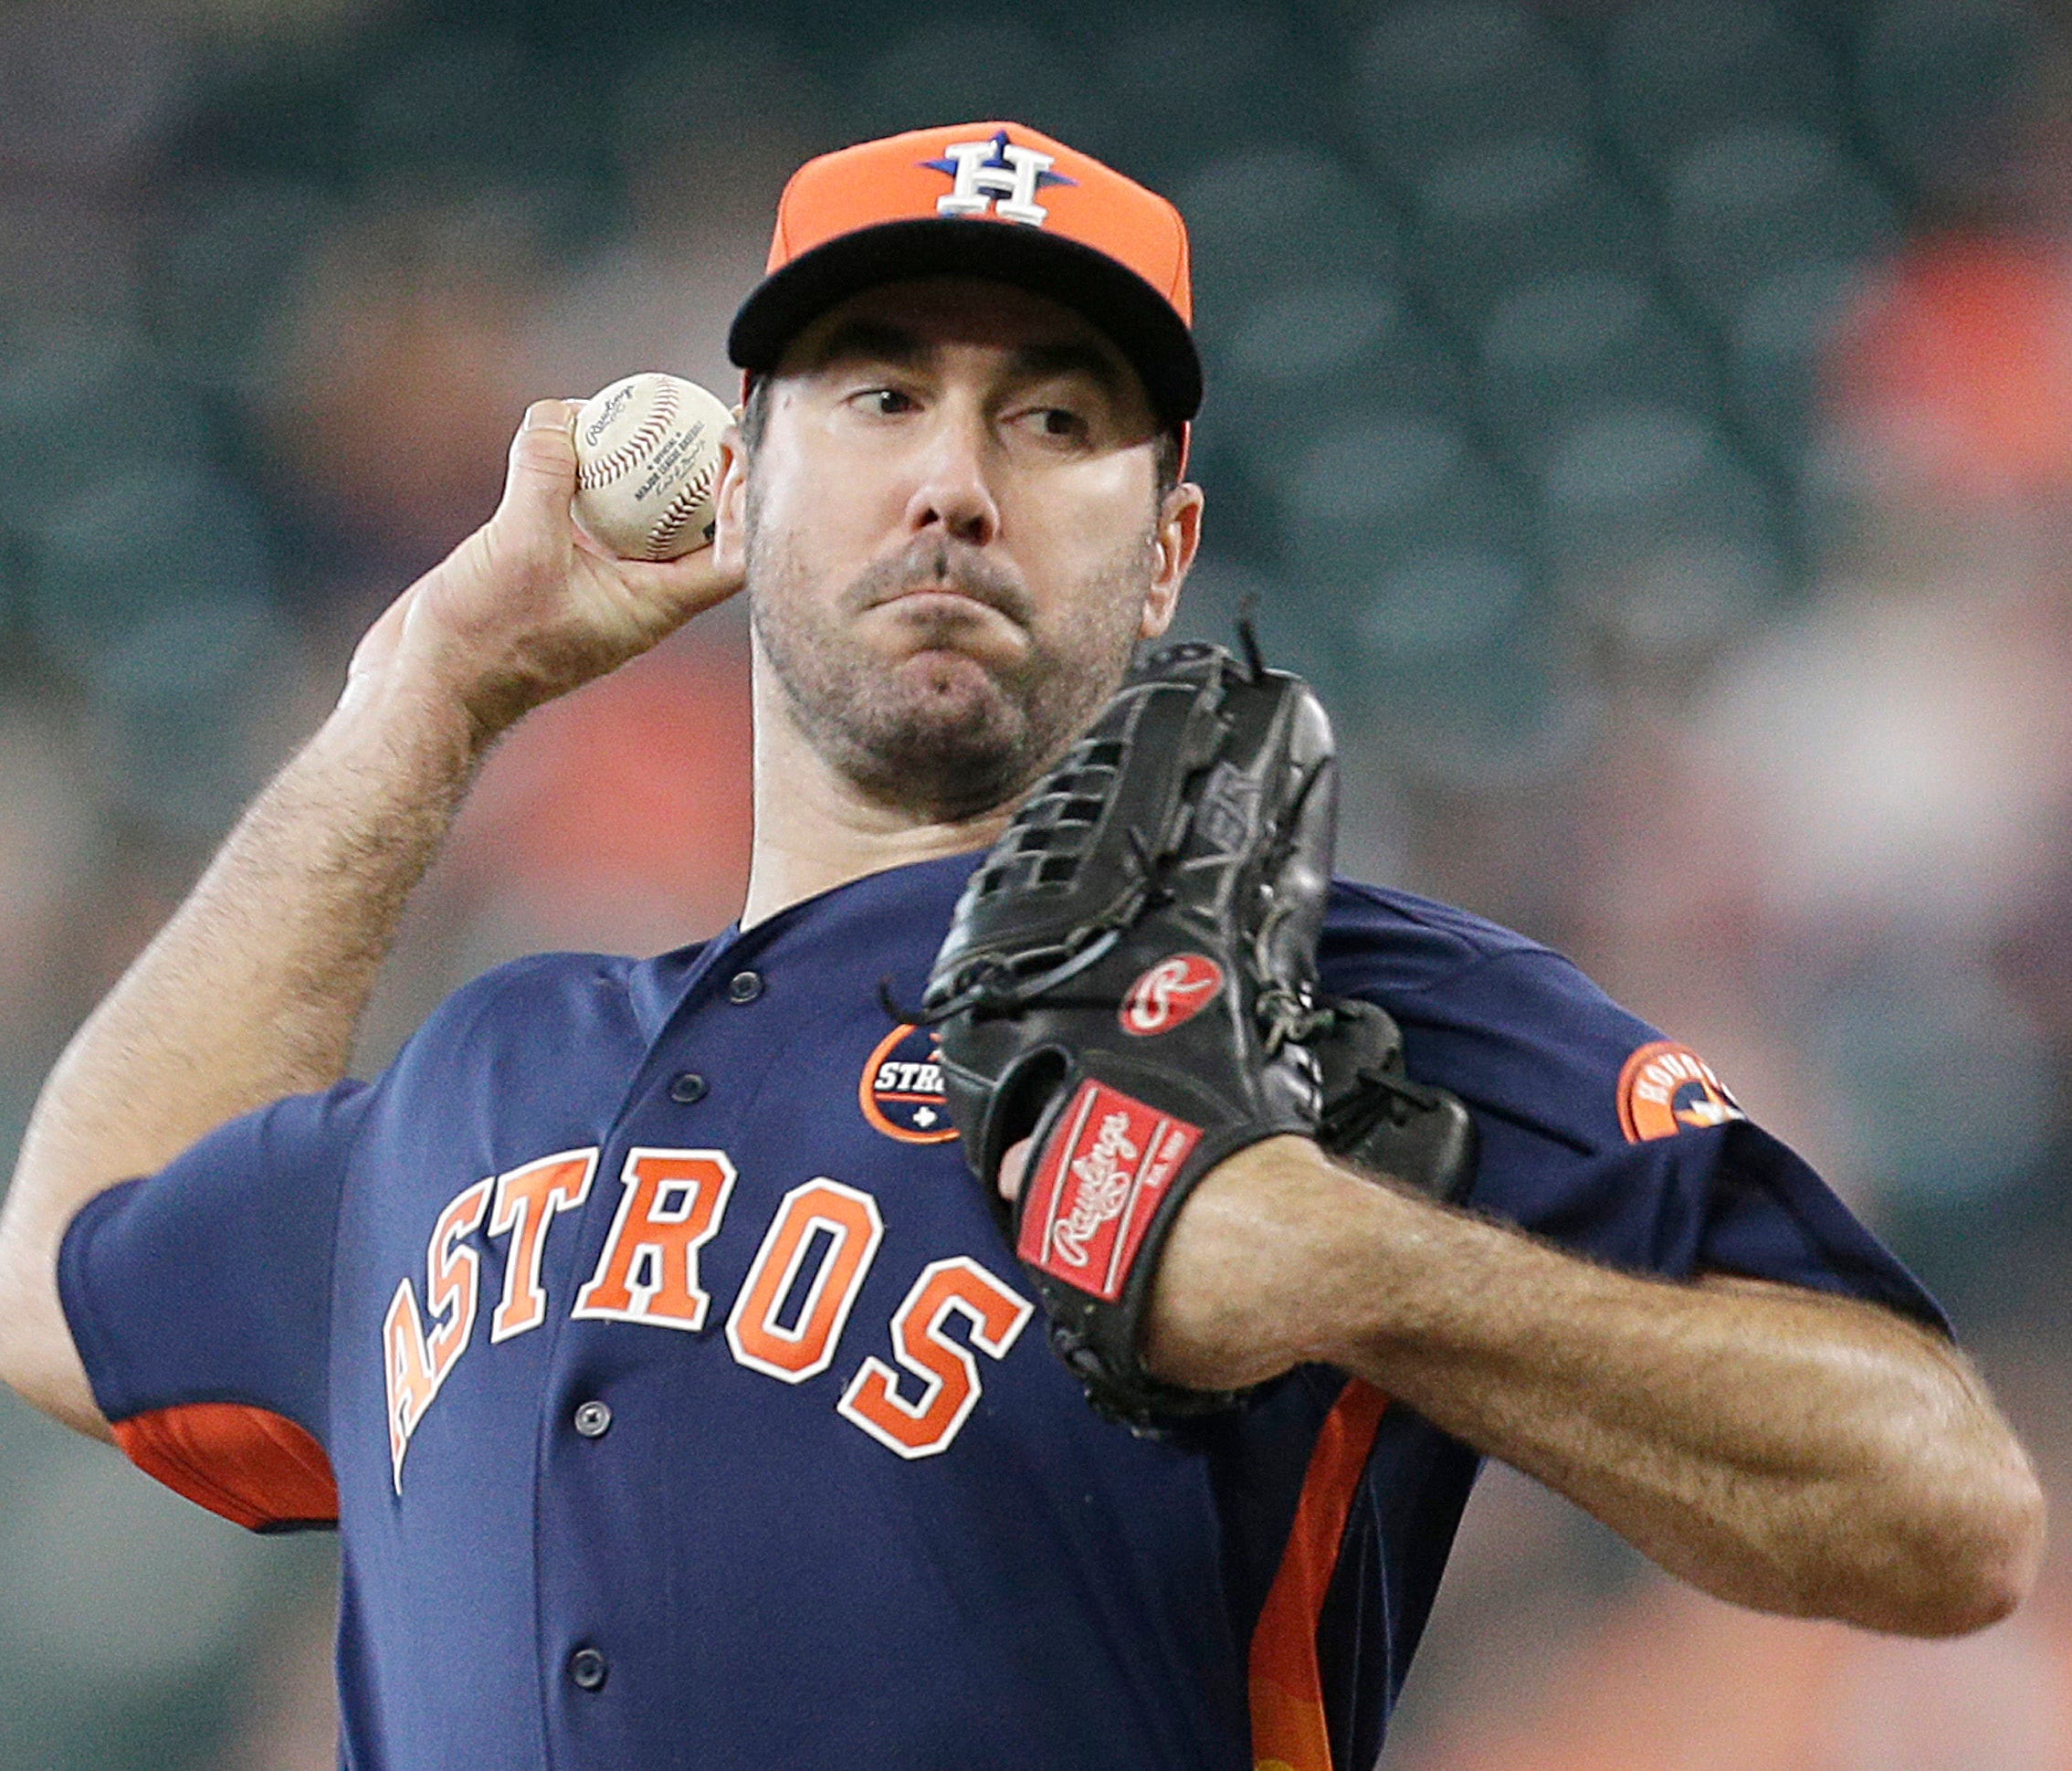 Justin Verlander is 5-0 with a 1.06 ERA in five starts since the trade.